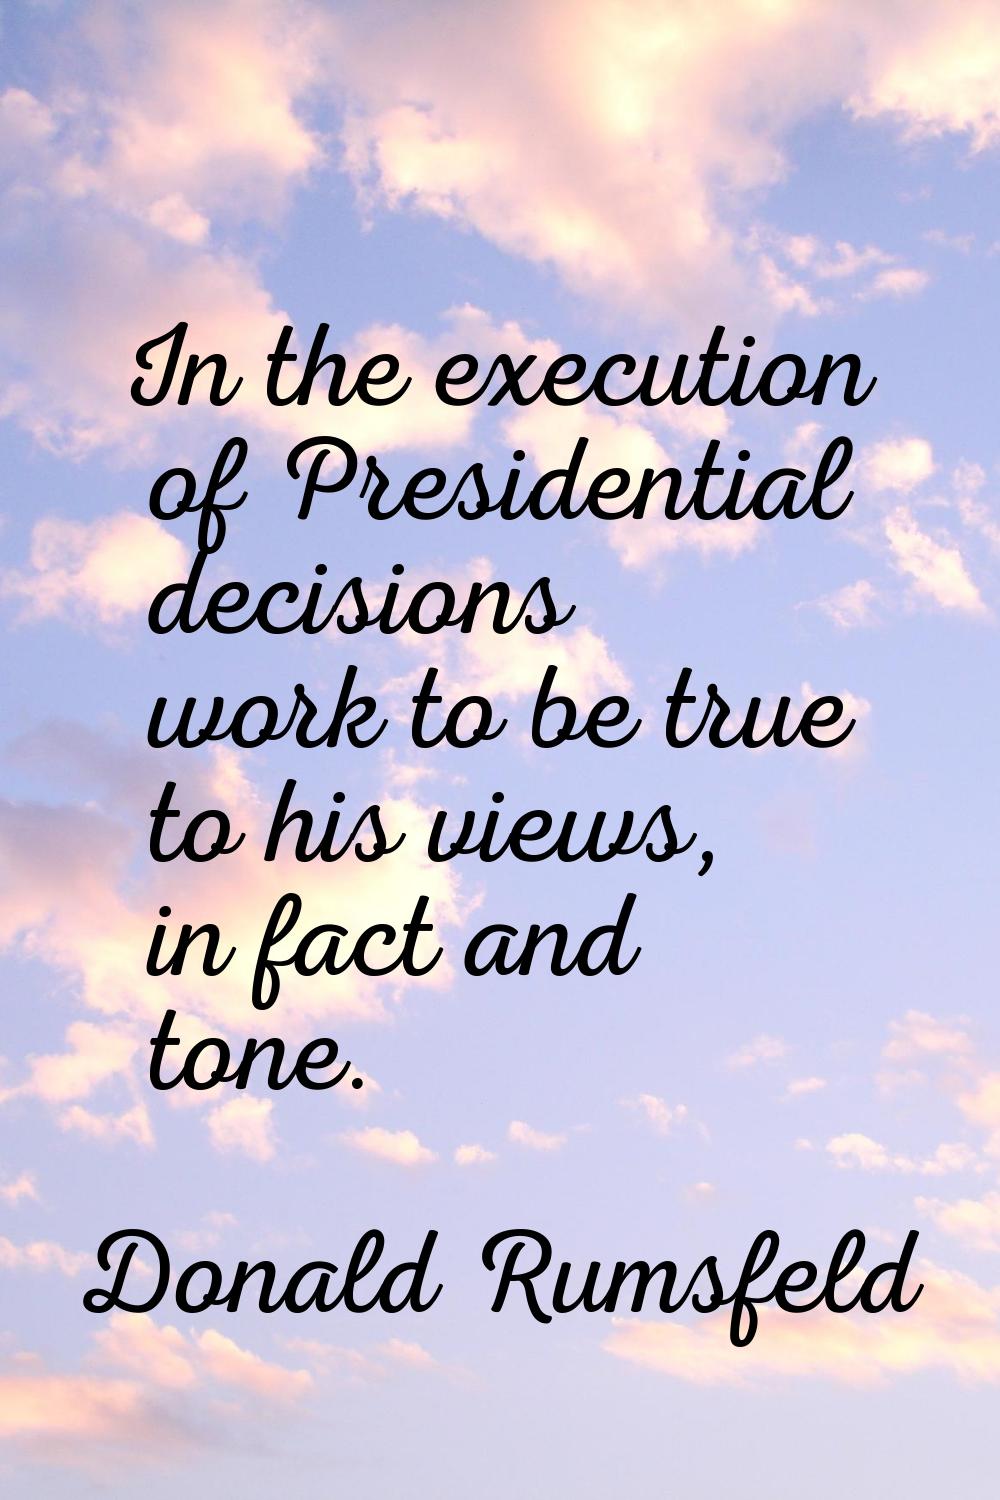 In the execution of Presidential decisions work to be true to his views, in fact and tone.